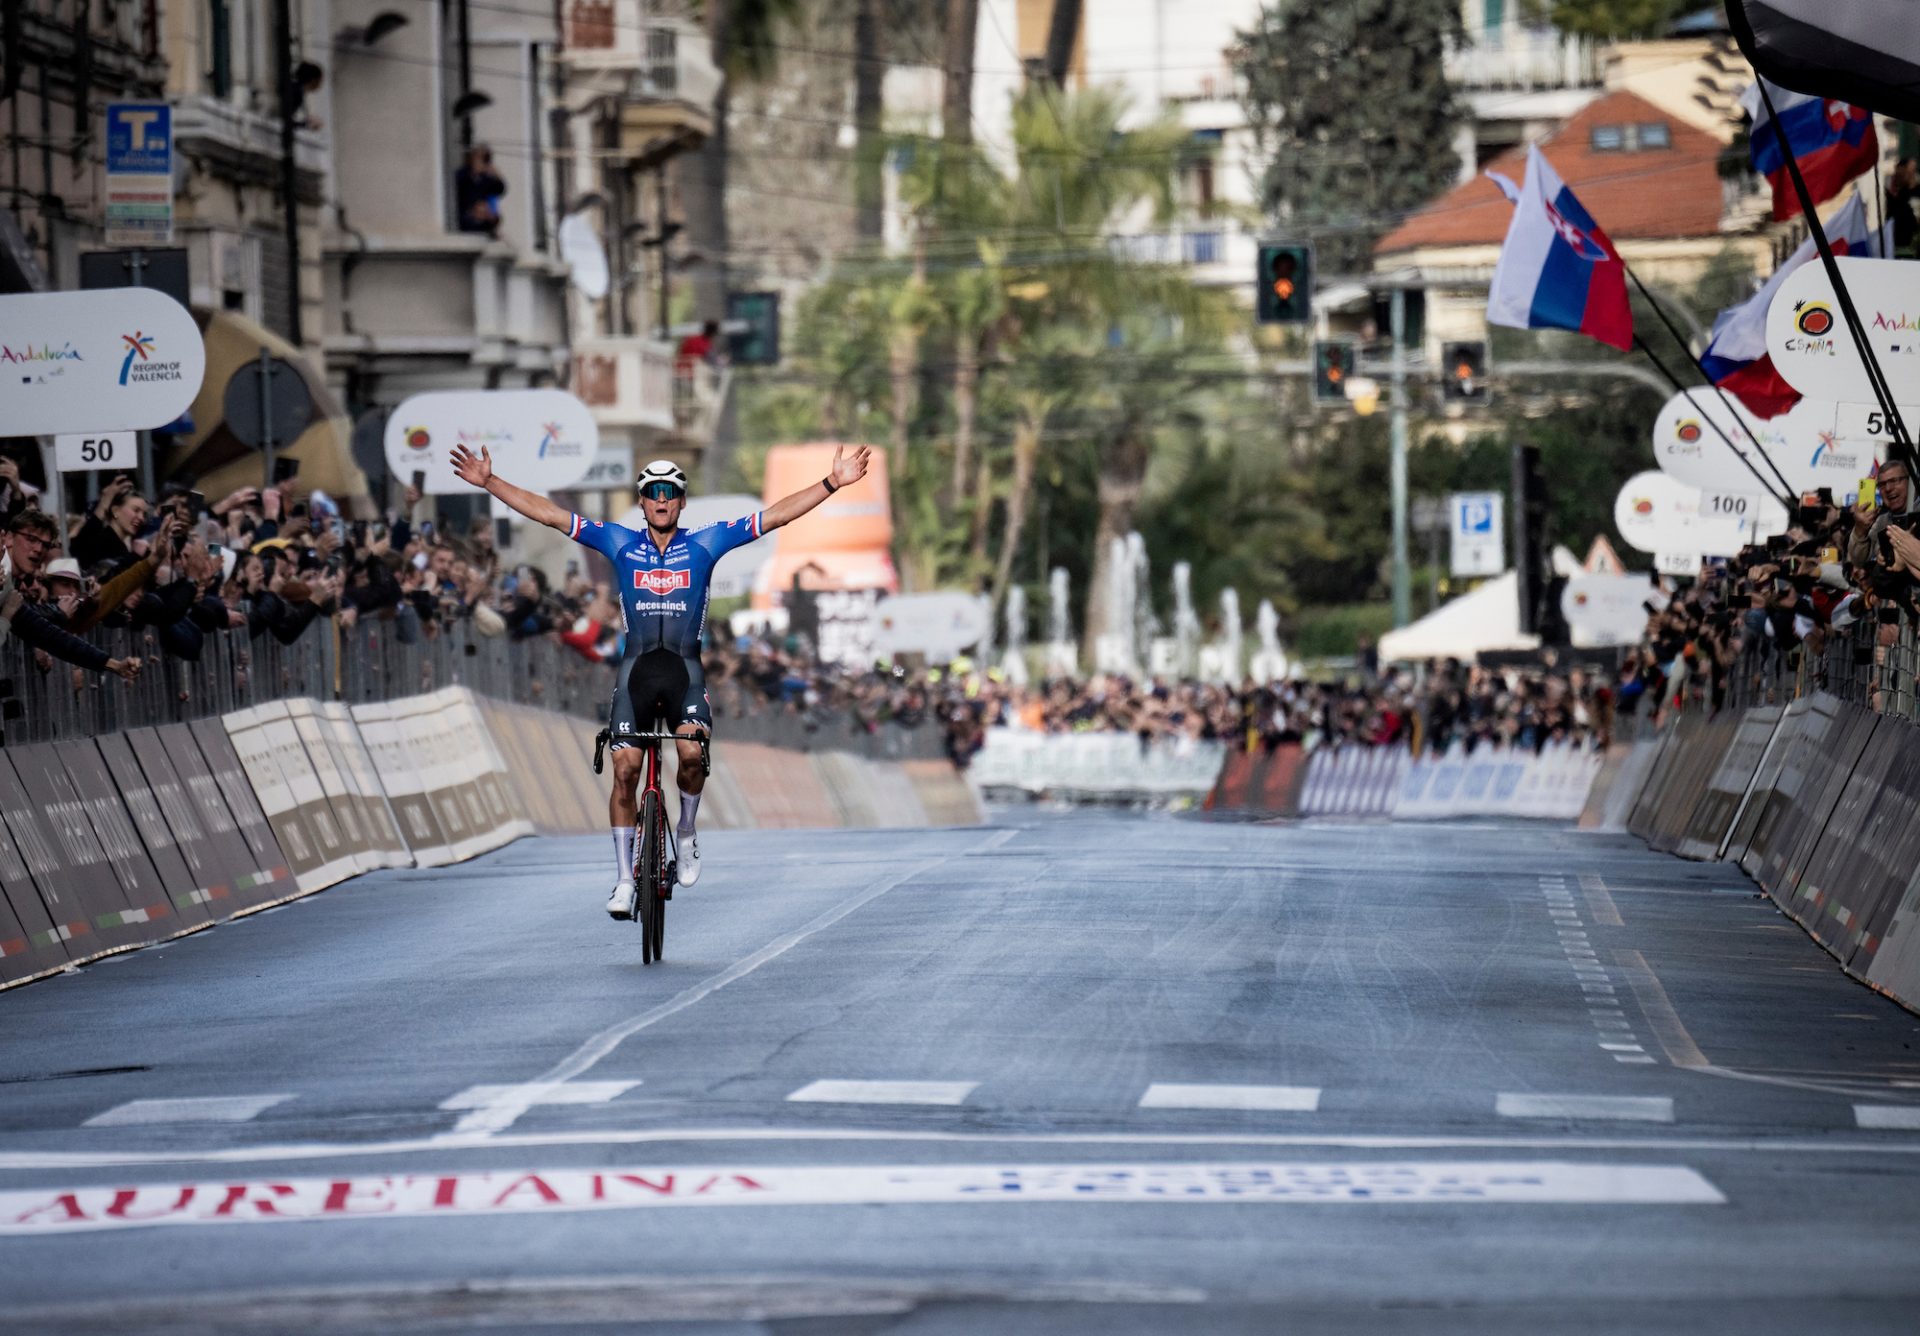 Mathieu van der Poel holds his arms aloft in a wide victory salute in Milan-San Remo. He's on the famous Via Roma, and behind him the fan-lined barriers frame an empty road as he rolls to the finish line solo.